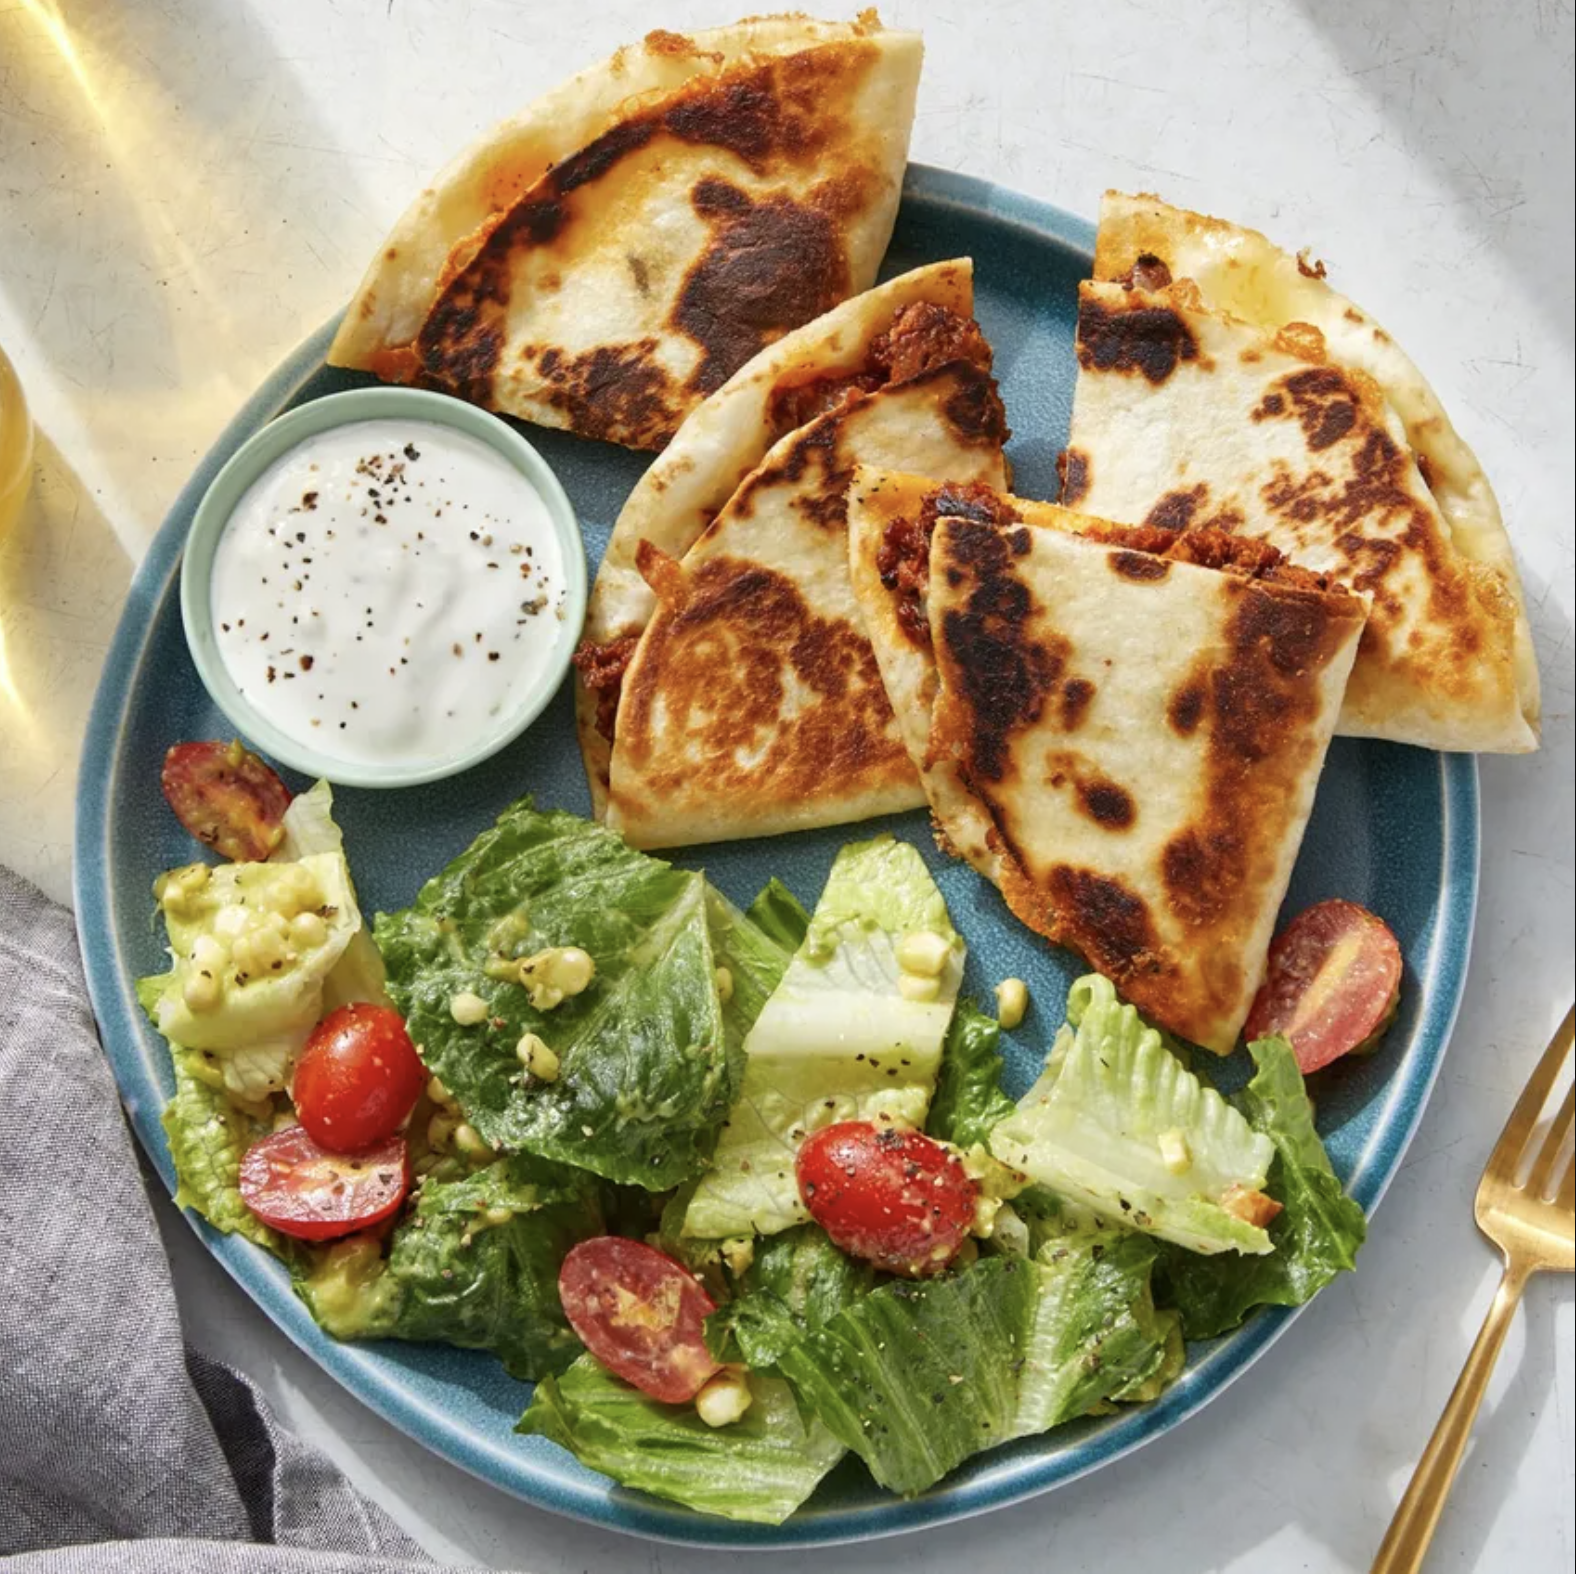 Quesadillas accompanied by salad and dipping sauce